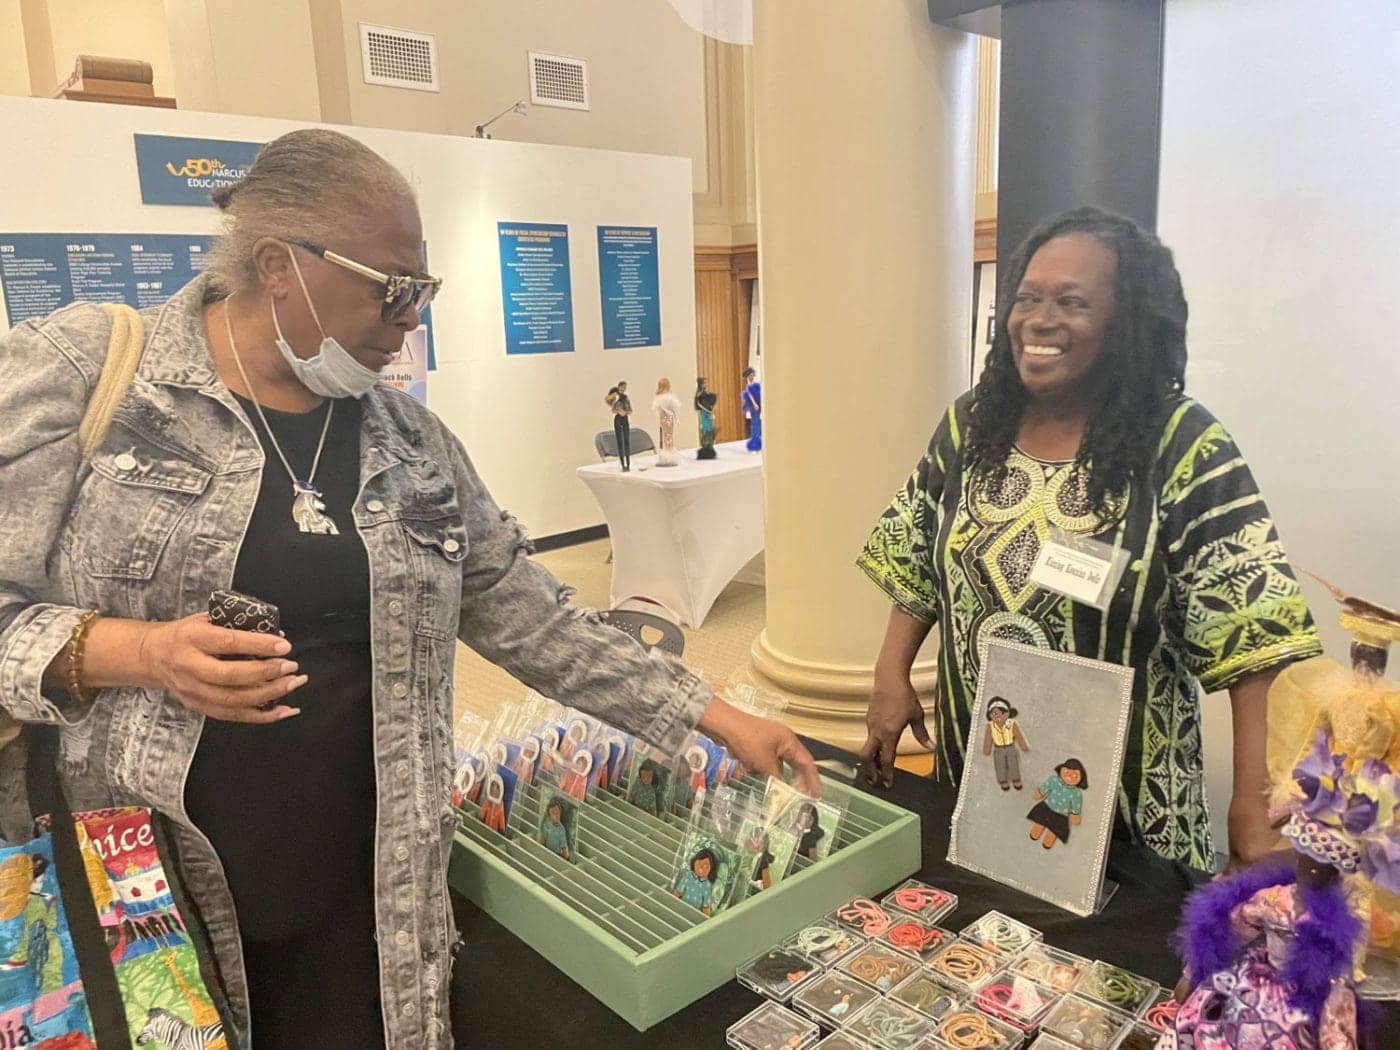 Black-Doll-Fest-Maxine-Grant-of-Alameda-buys-from-fest-founder-Karen-Oyekanmi-AAMLO-110423-by-Daphne-1400x1050, Black Doll Festival visits Oakland’s African American Museum, Culture Currents World News & Views 